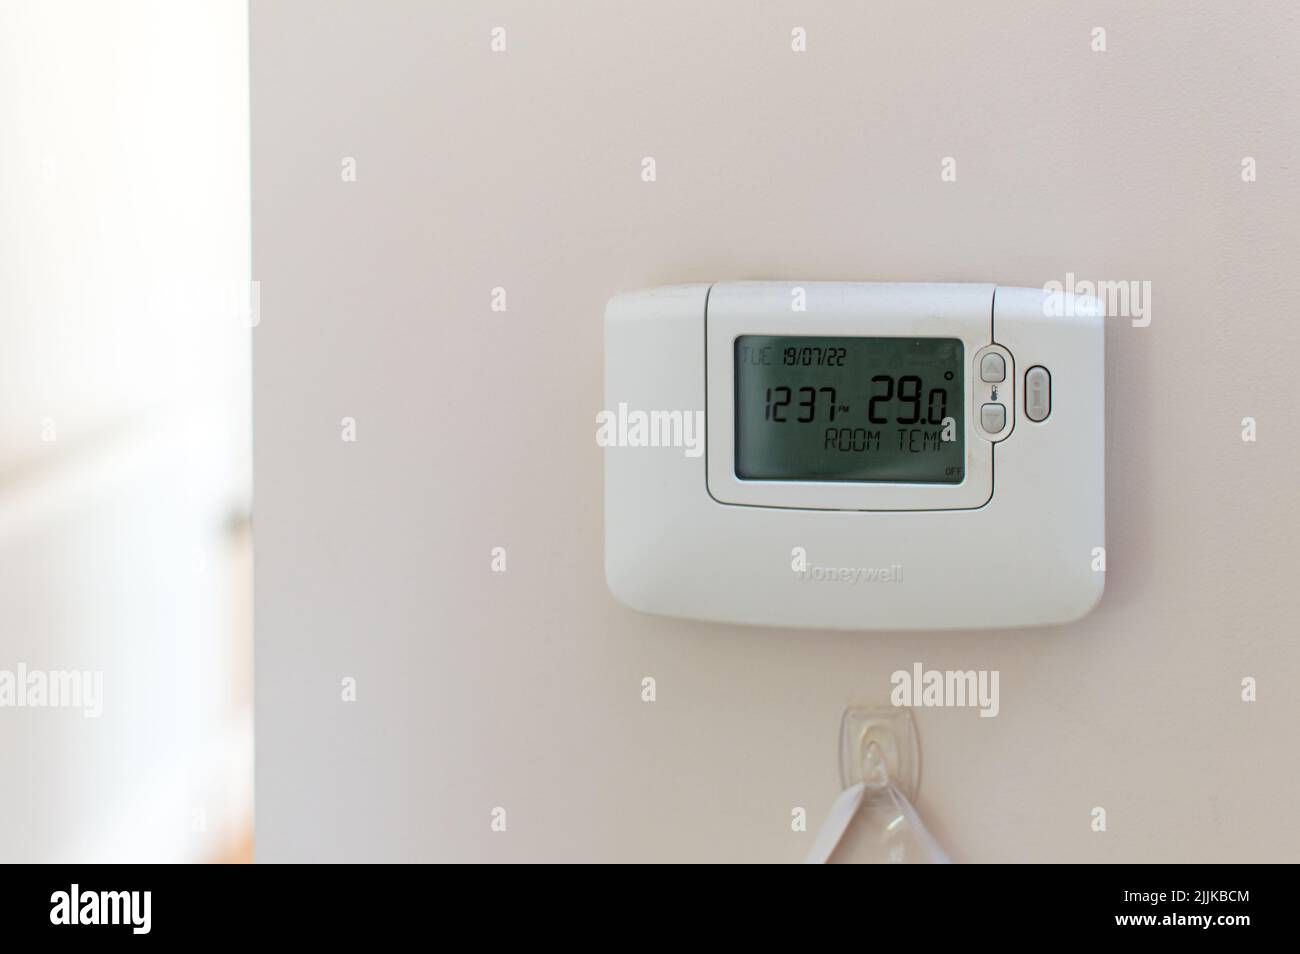 Home thermostat showing 29 degree celcius temperature Stock Photo